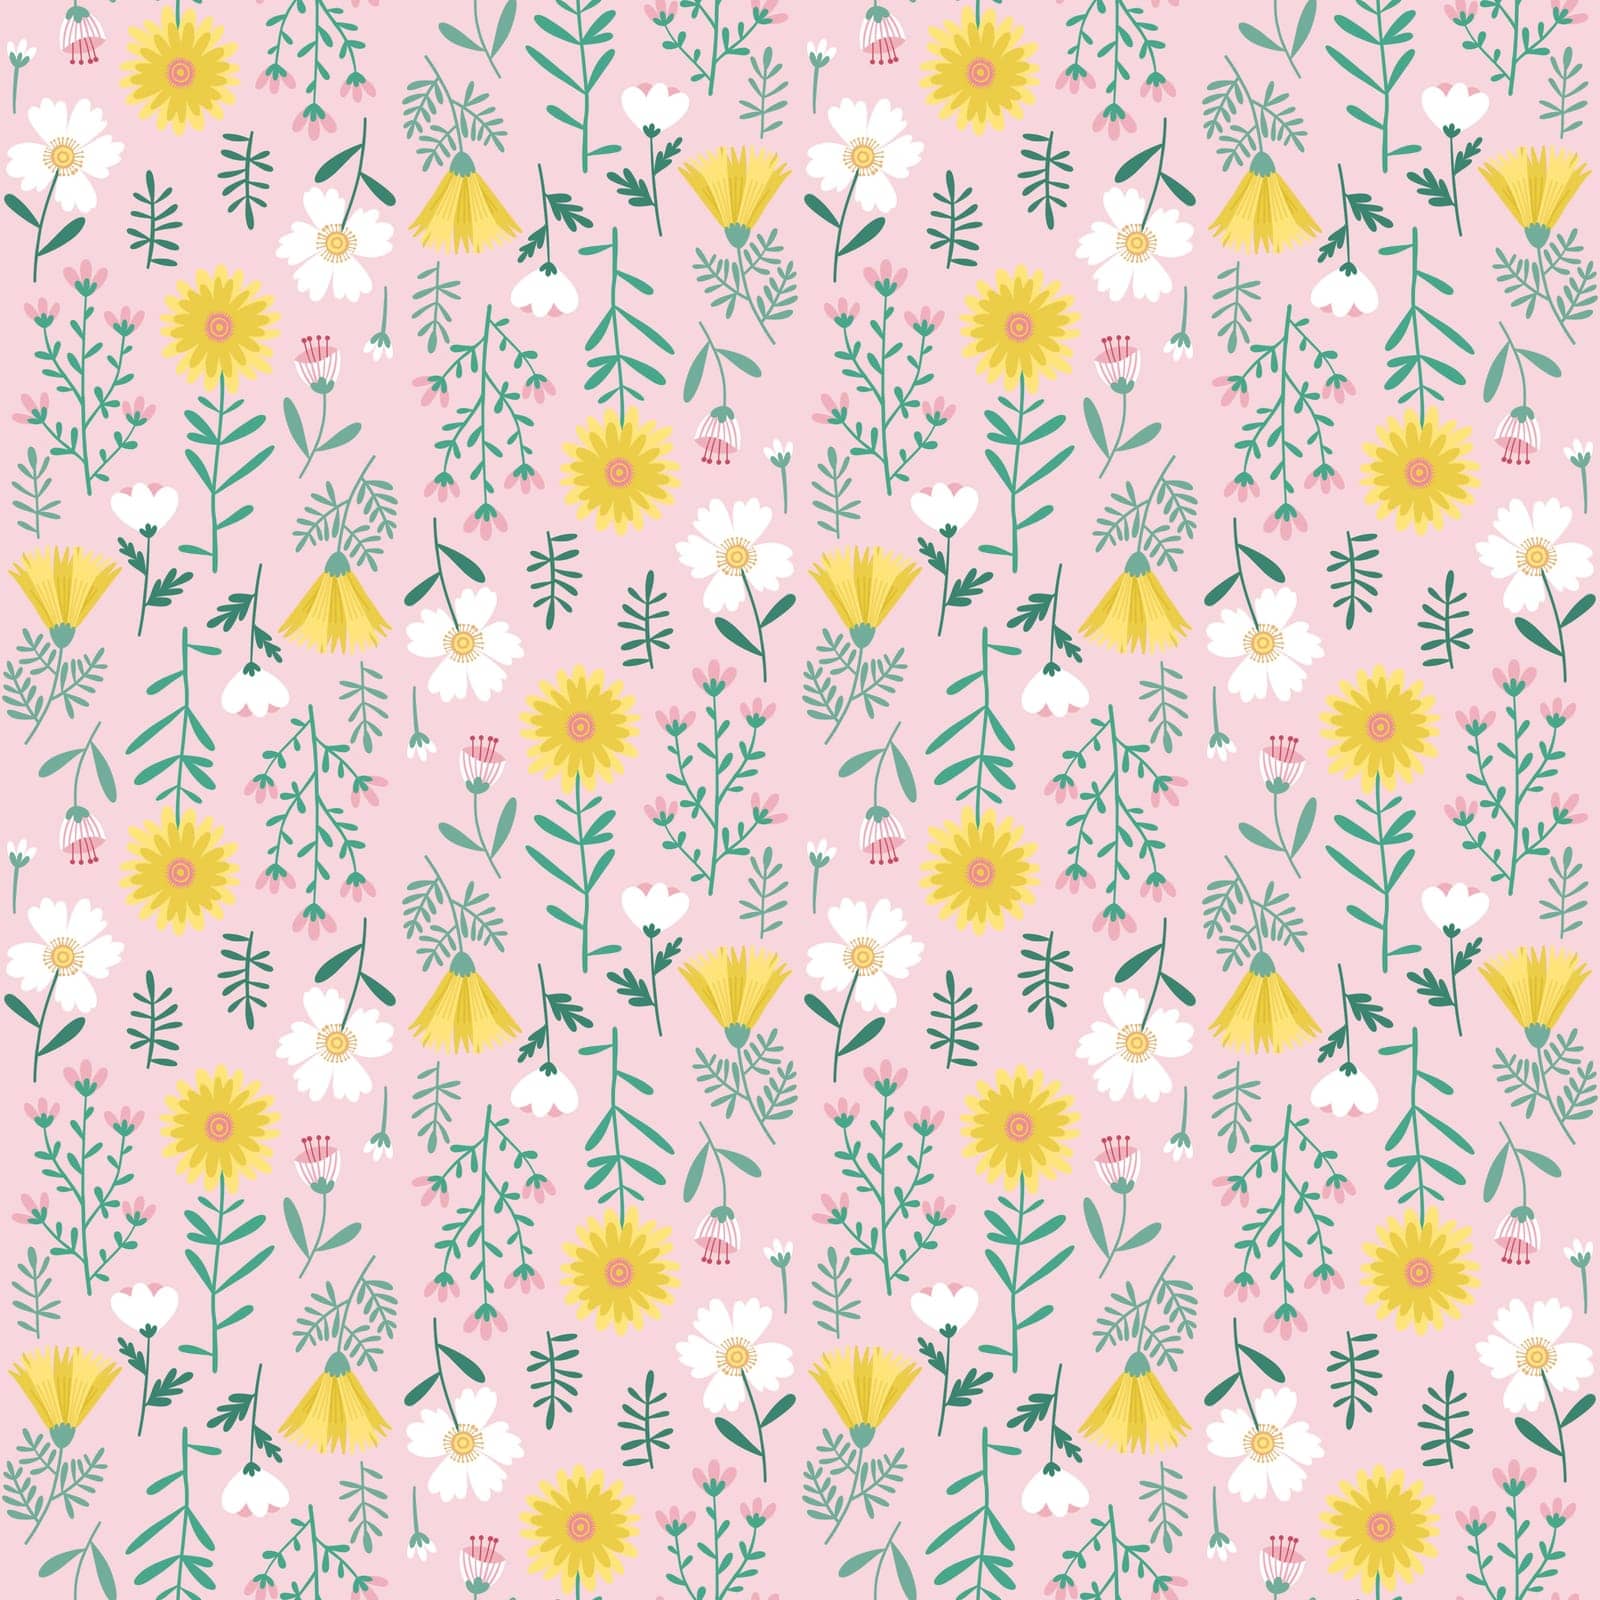 Floral Seamless Pattern of White, Pink, Yellow Flowers on Light Pink Backdrop by LanaLeta